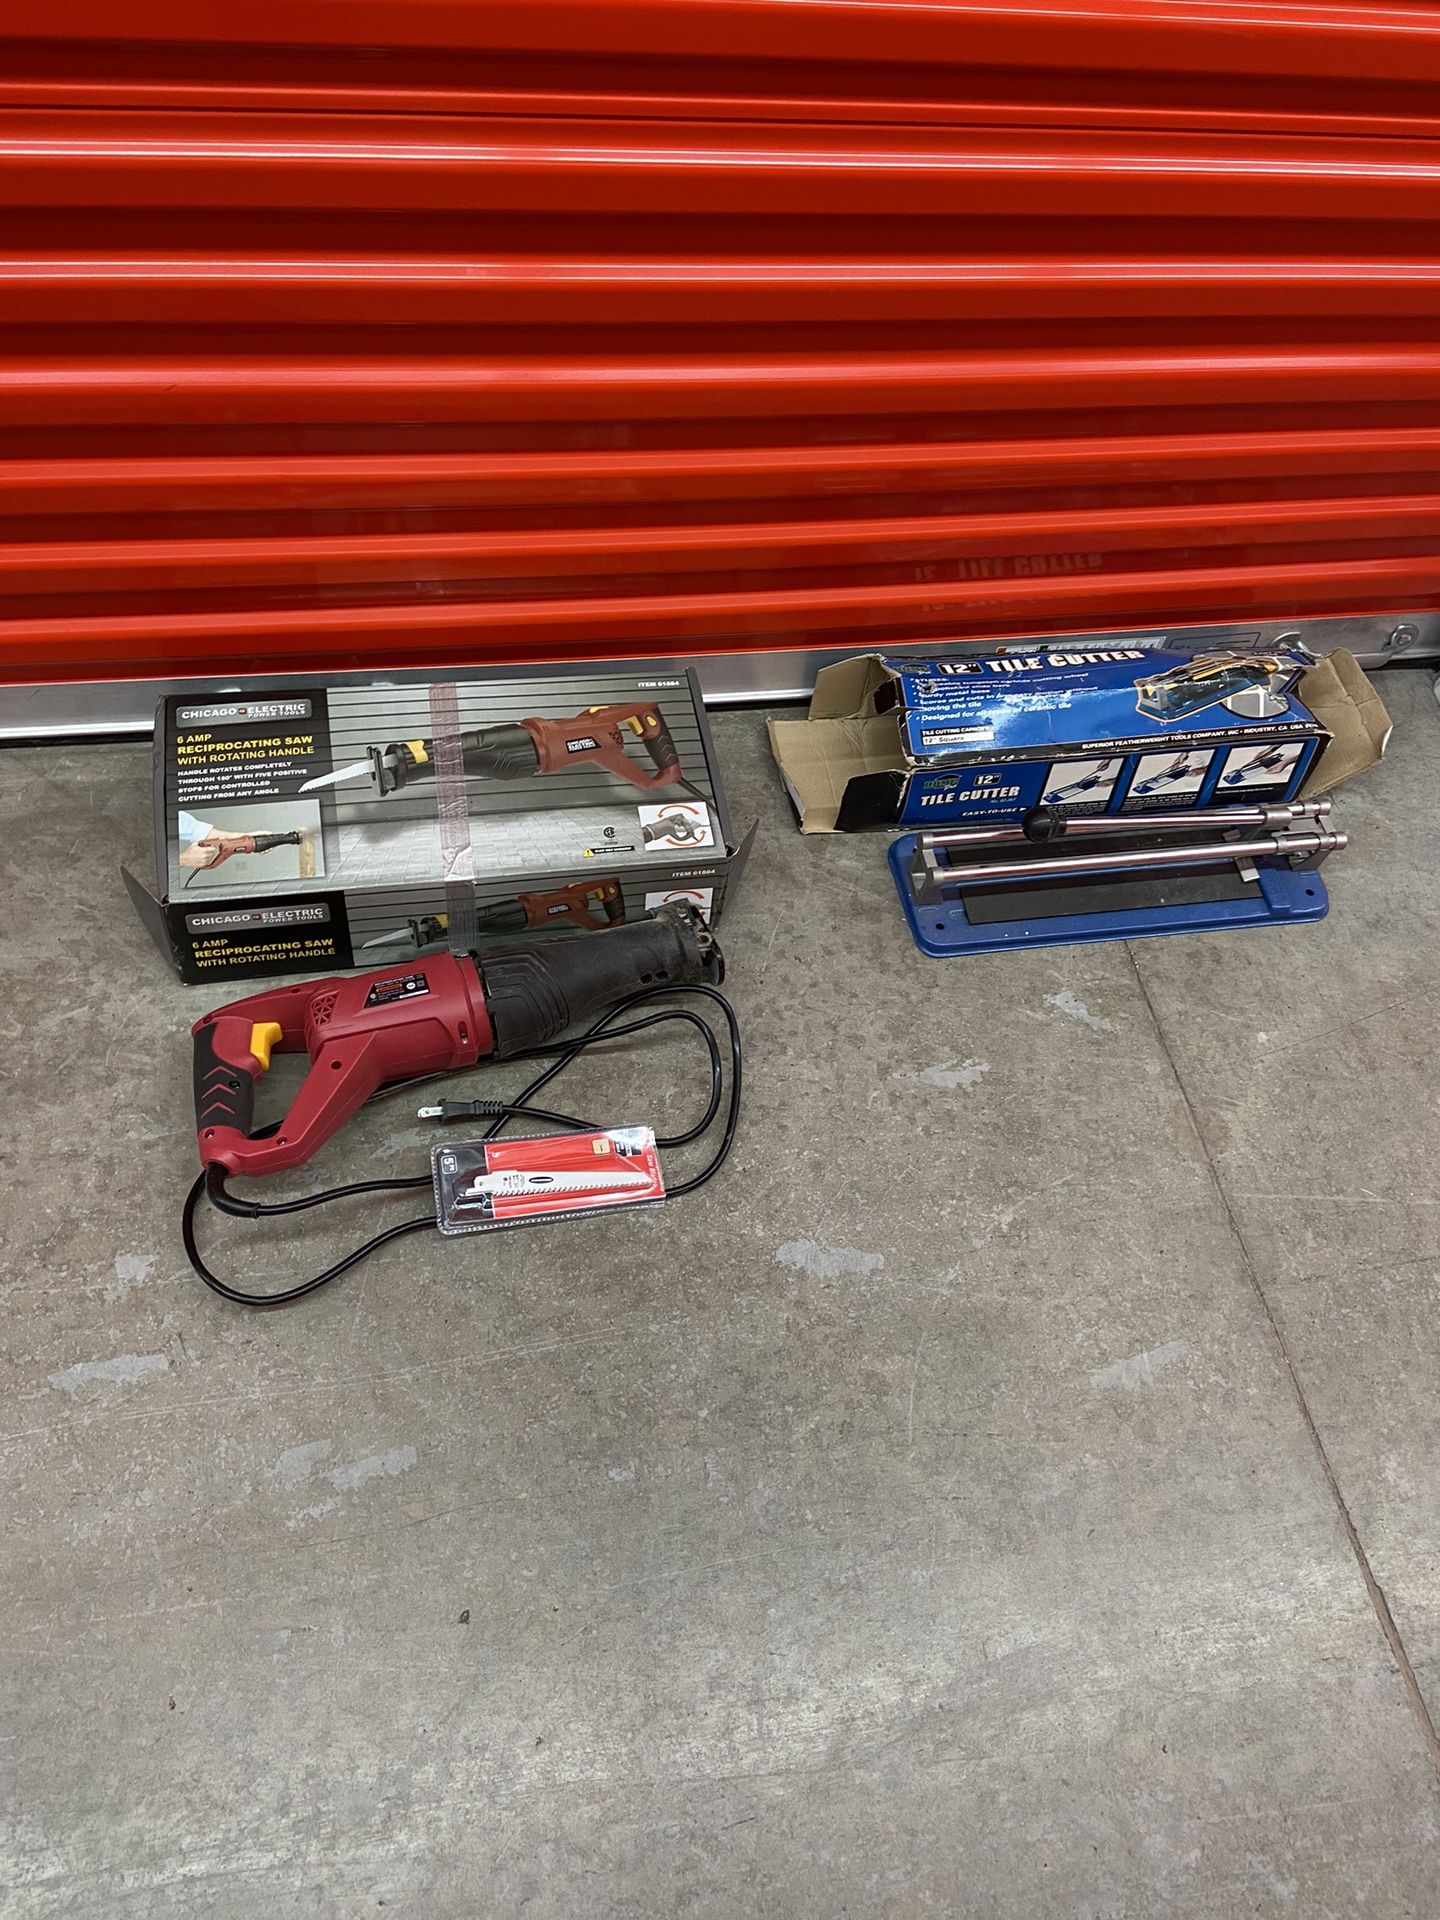 Saw Tile Cutter Combo